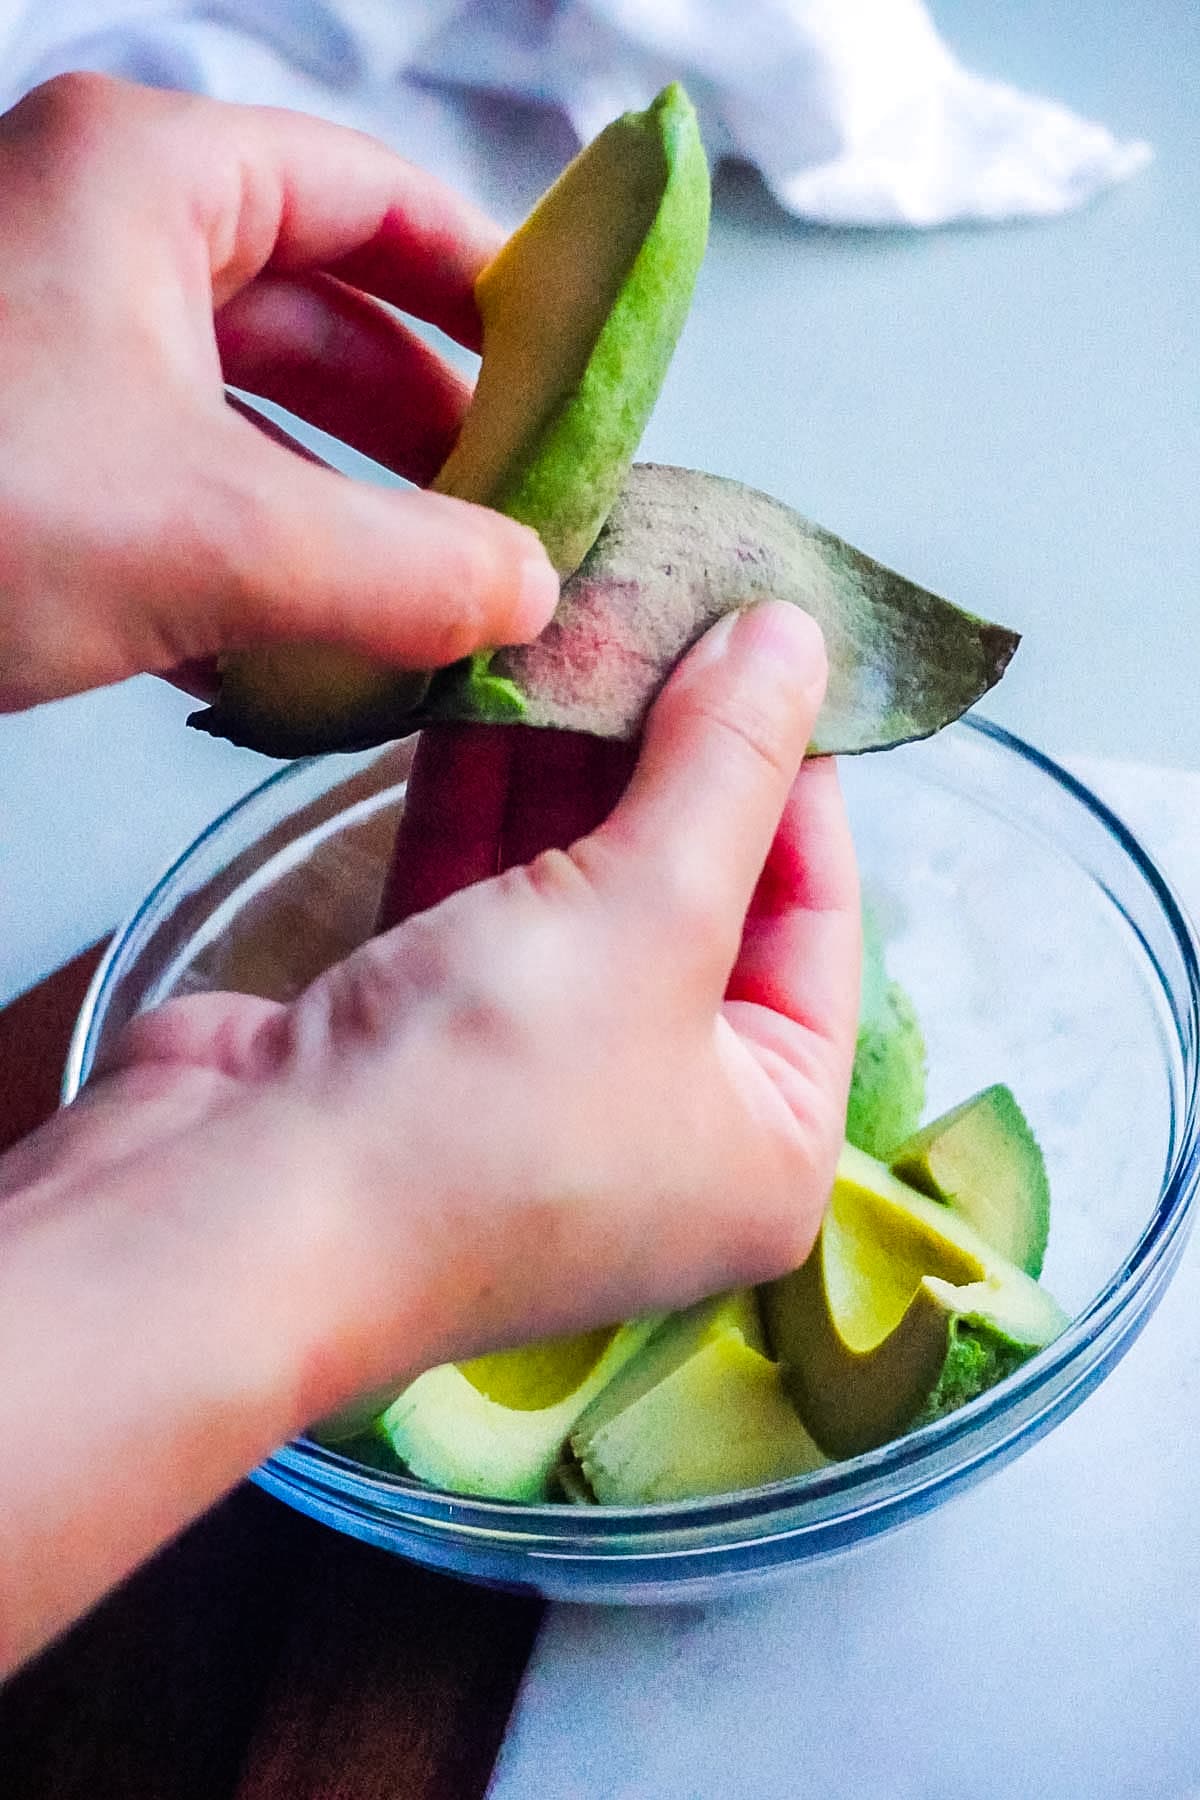 A picture showing how to cut and peel and avocado.